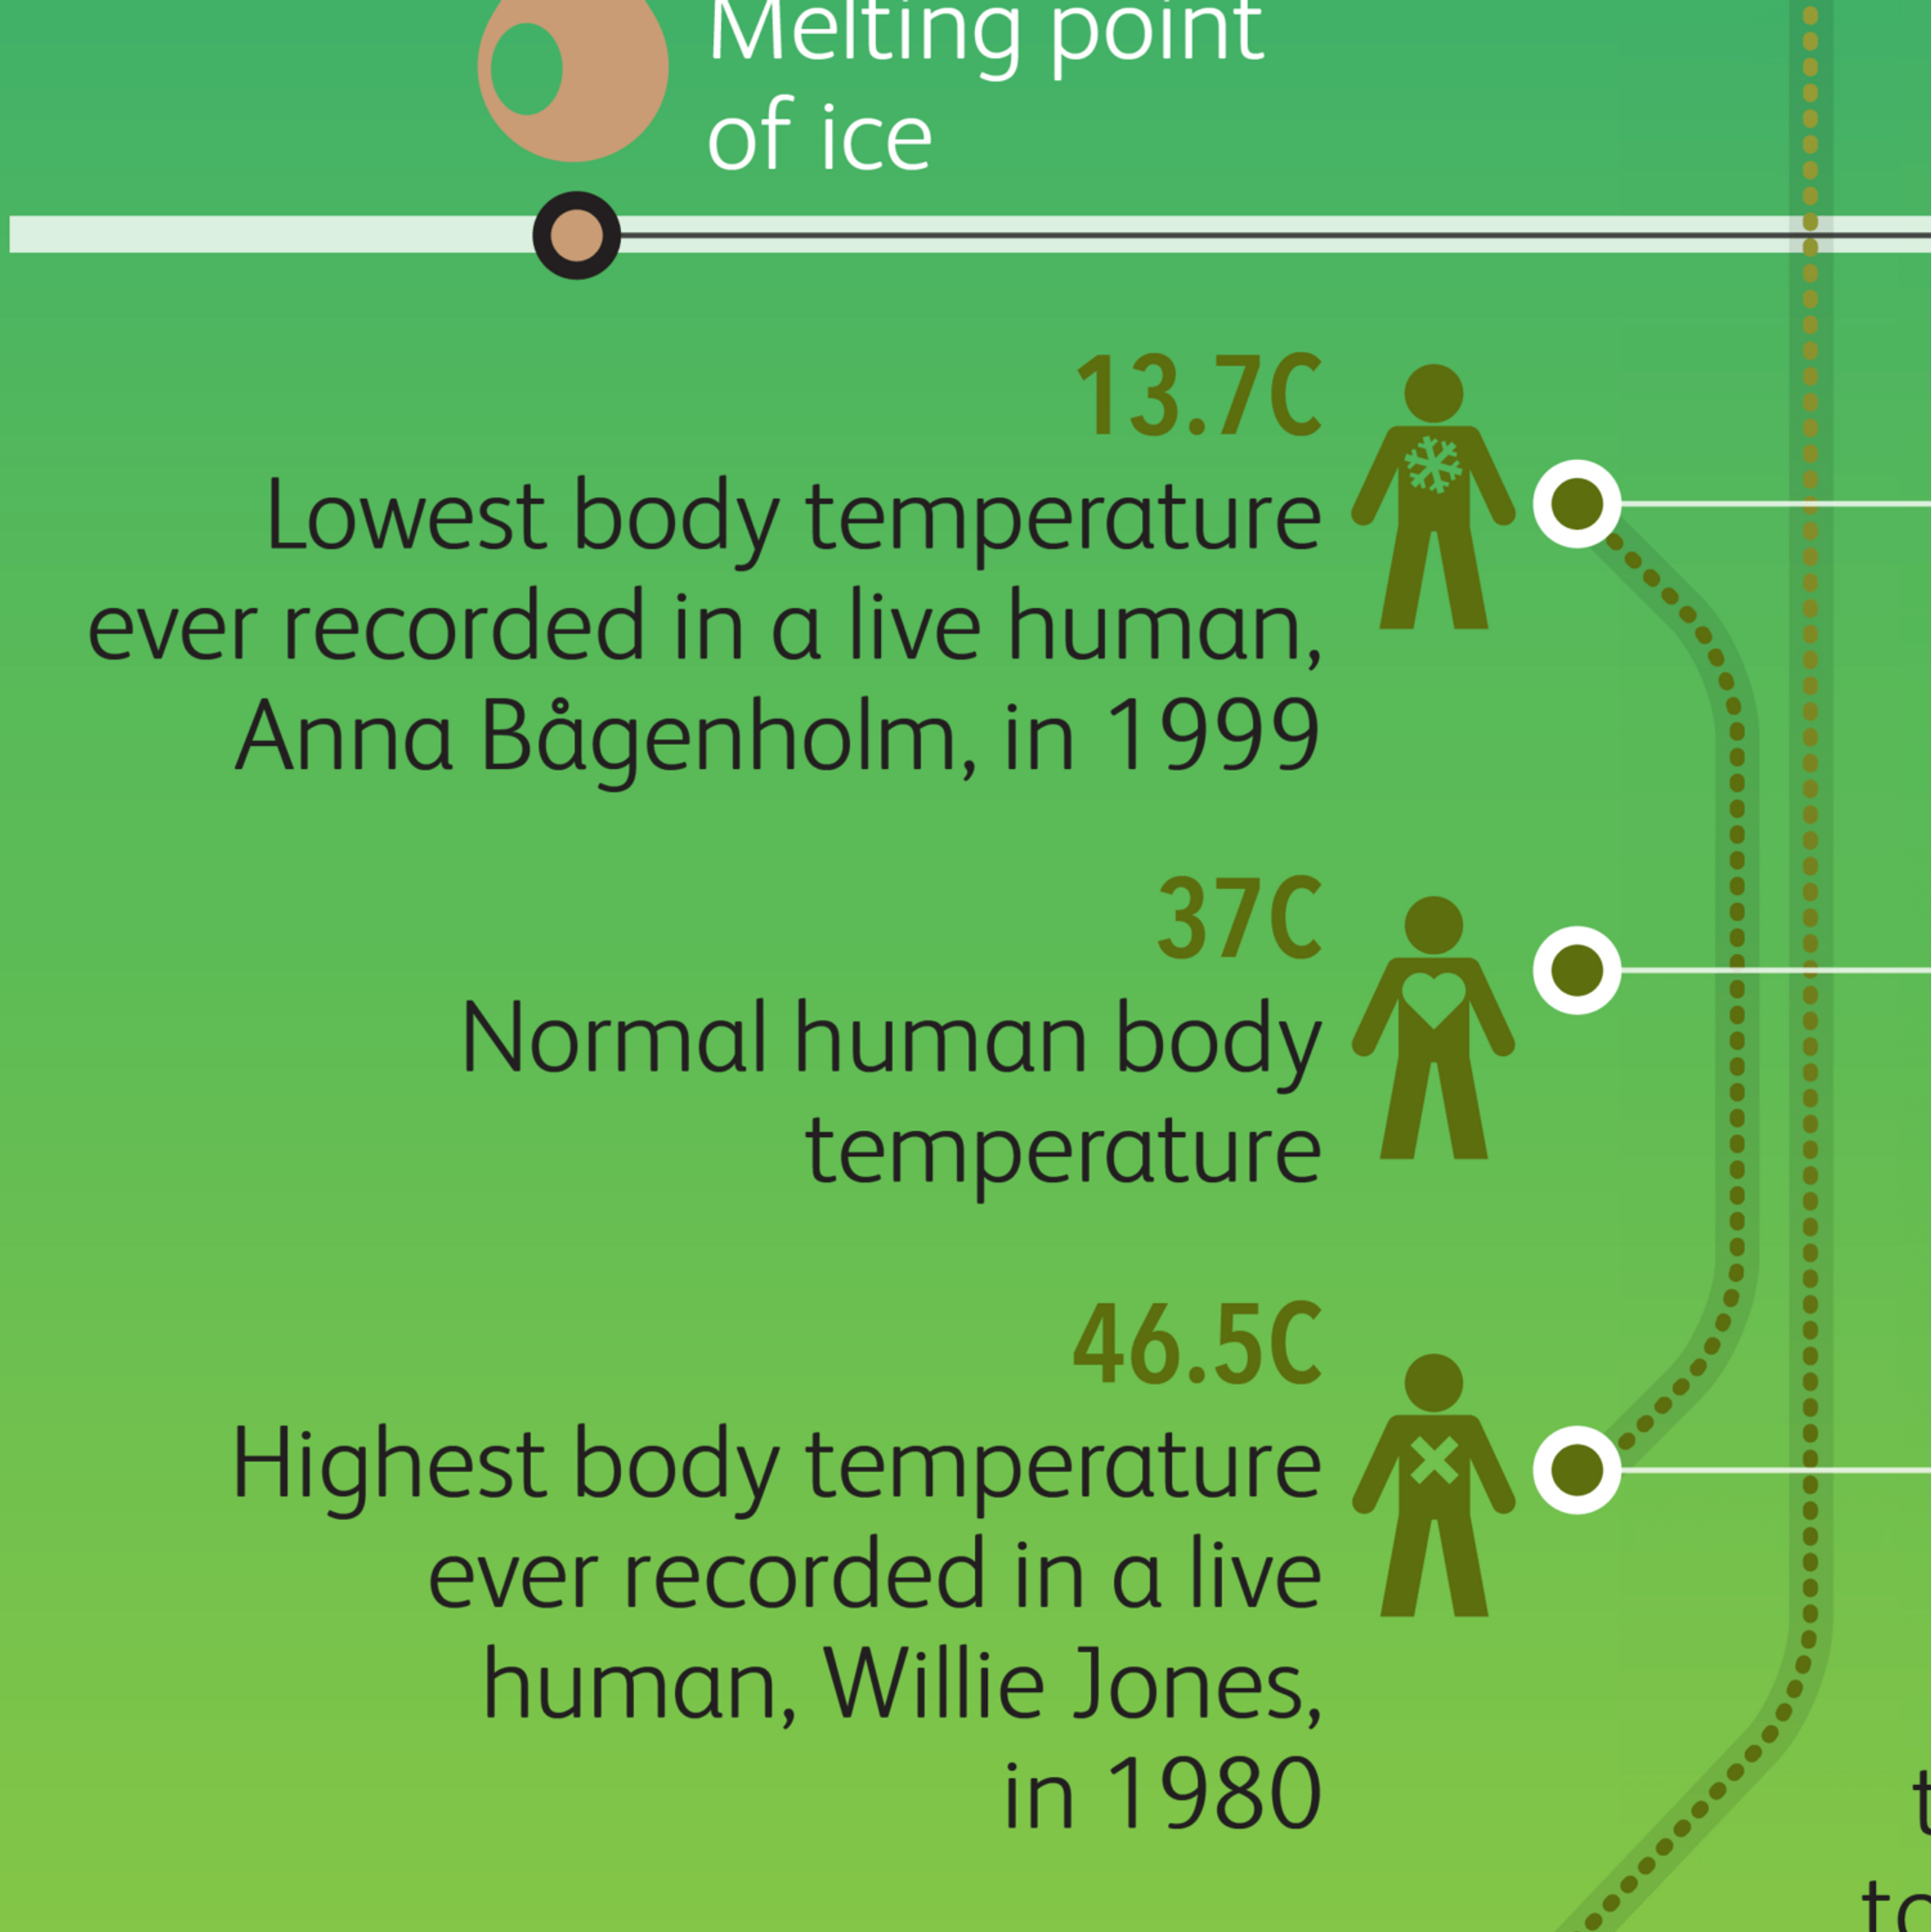 A screenshot of the Billion Degrees of Separation graphic. It shows the average human body temperature (37 Celcius), the lowest recorded body temperature of a live human (13.7 Celcius) and the highest body recorded live body temperature of 46.5 degrees Celcius.